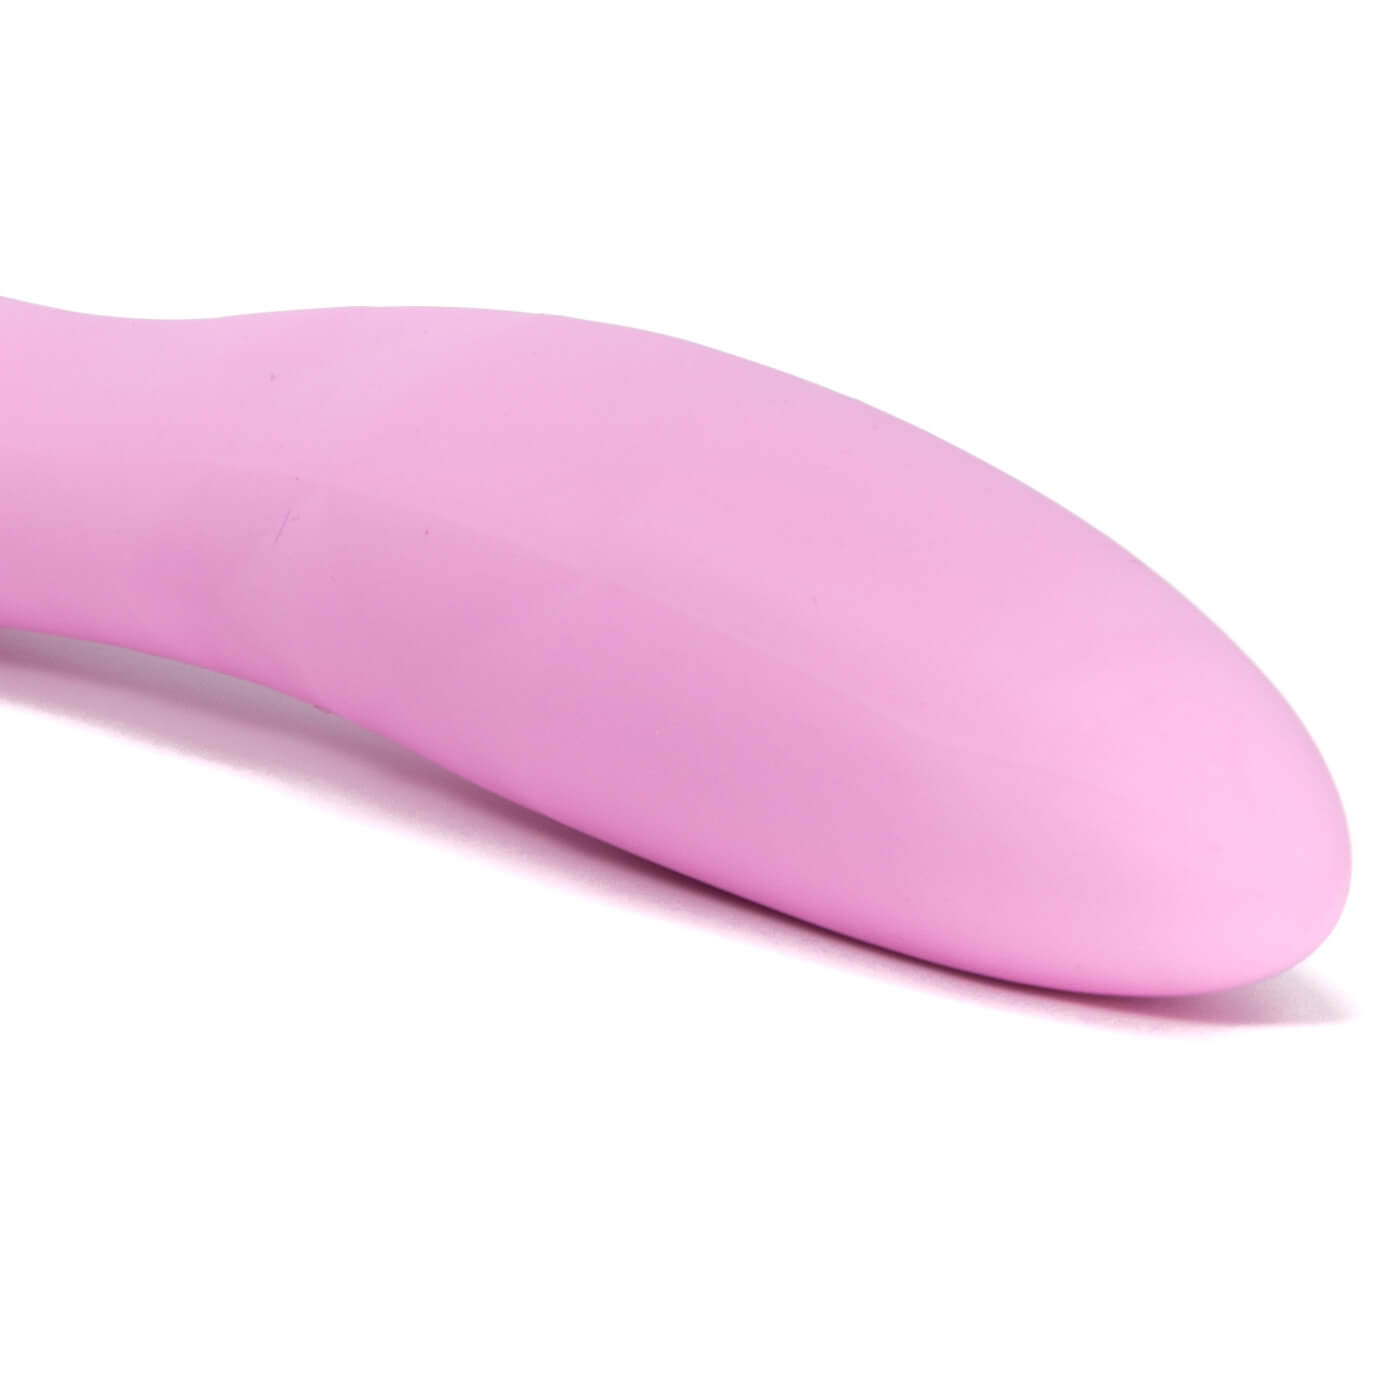 Jopen Amour 7 Function USB Rechargeable Vibrating Wand